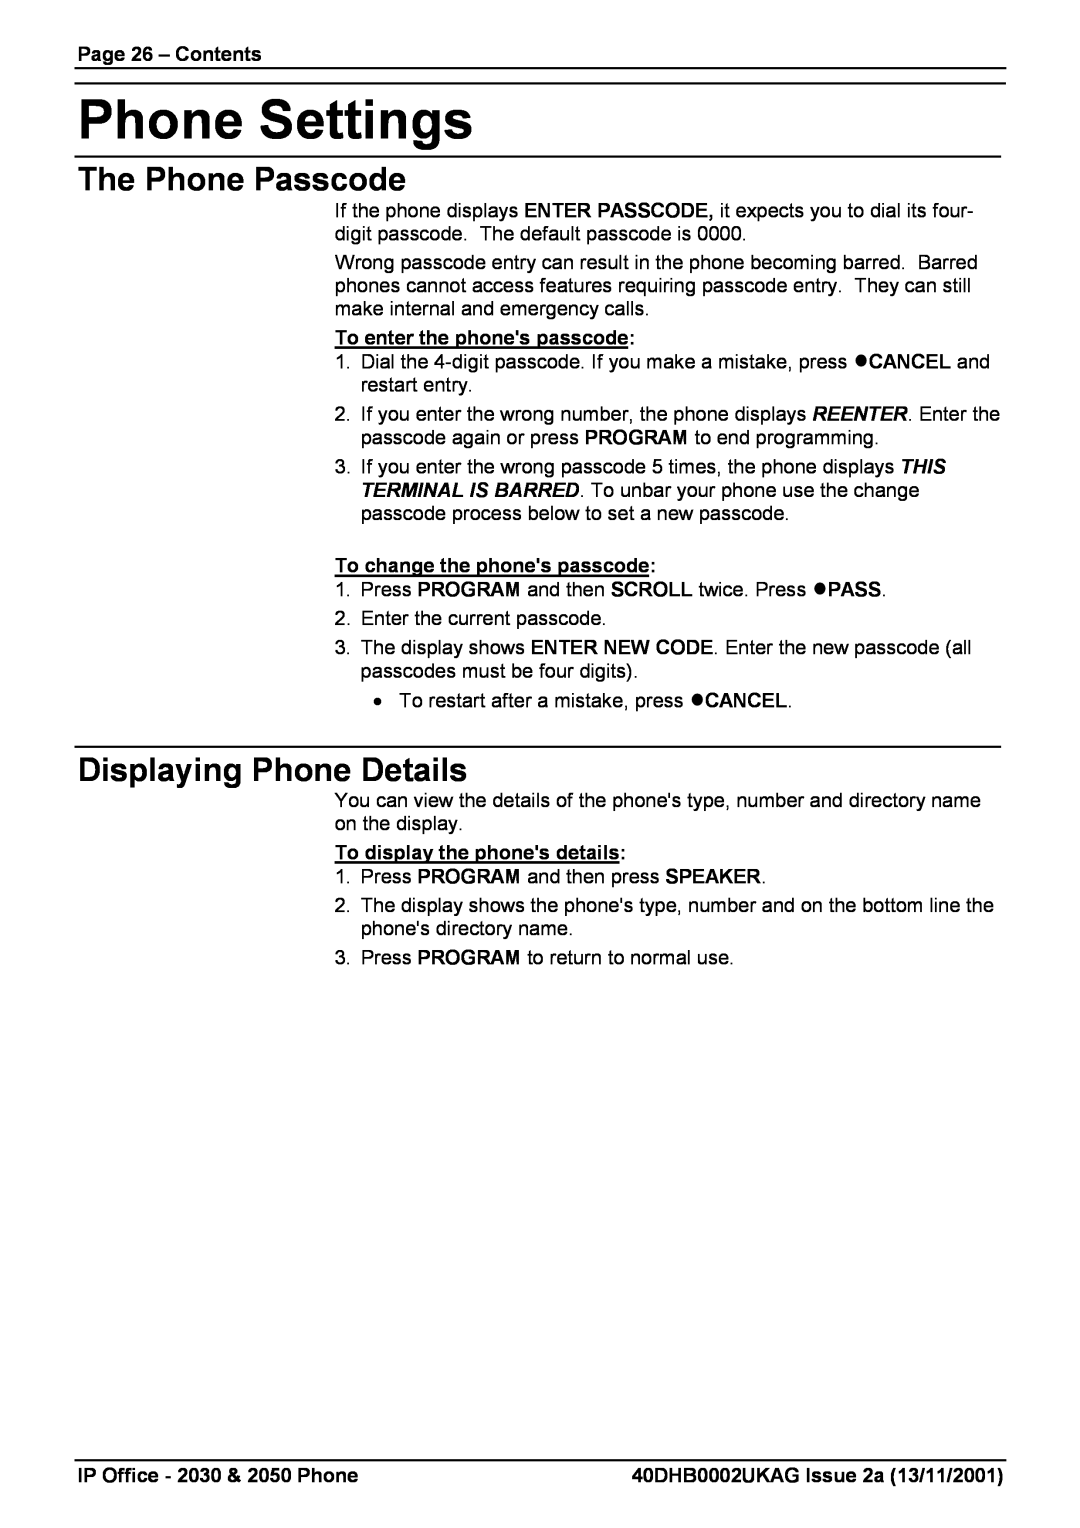 Avaya 2050 Phone Settings, The Phone Passcode, Displaying Phone Details, Page 26 - Contents, To enter the phones passcode 